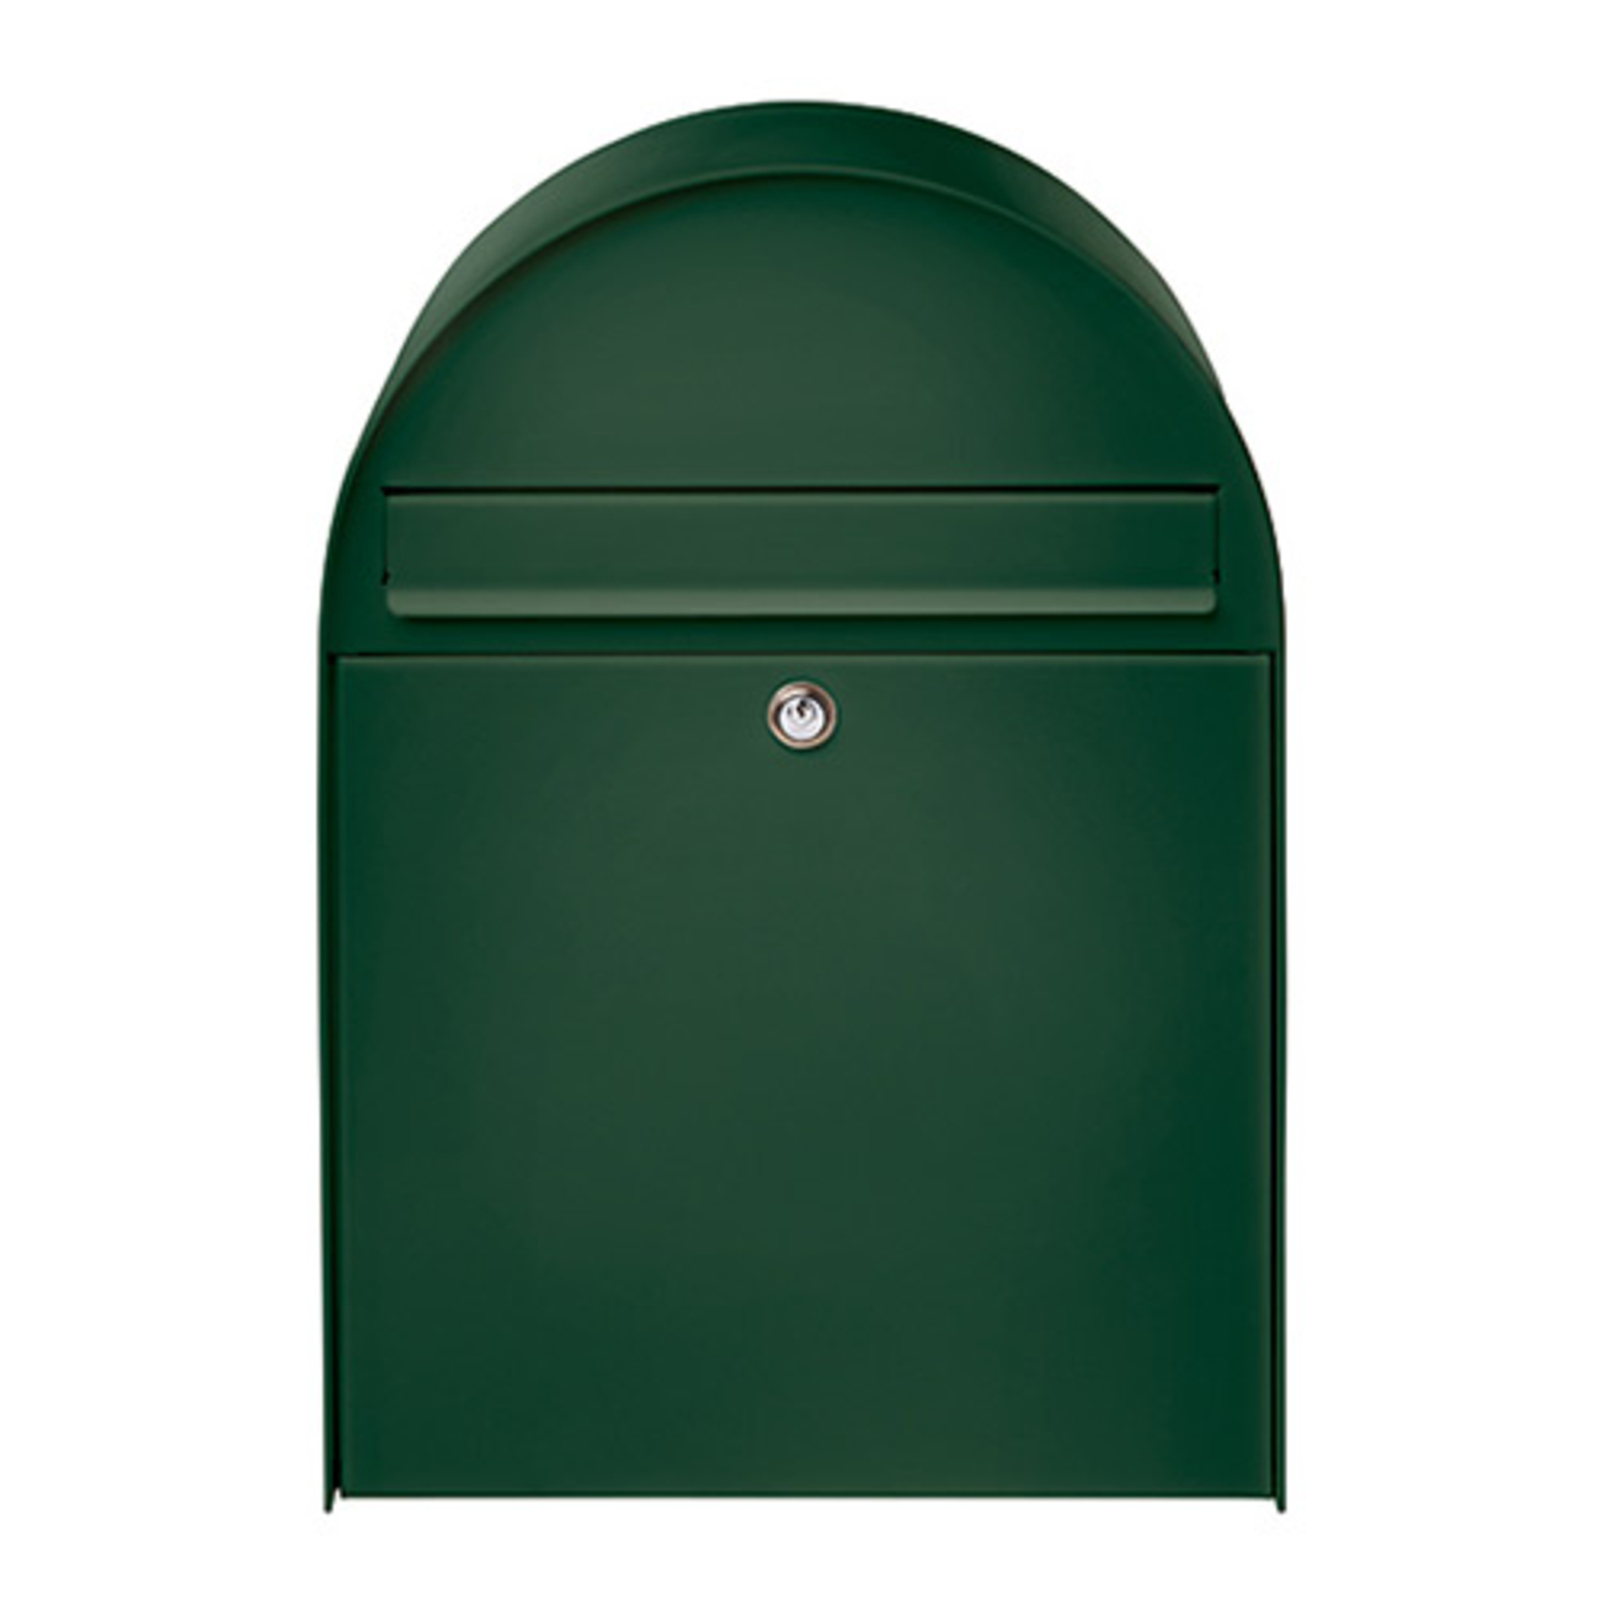 Nordic 780 - large letter box, coated in green